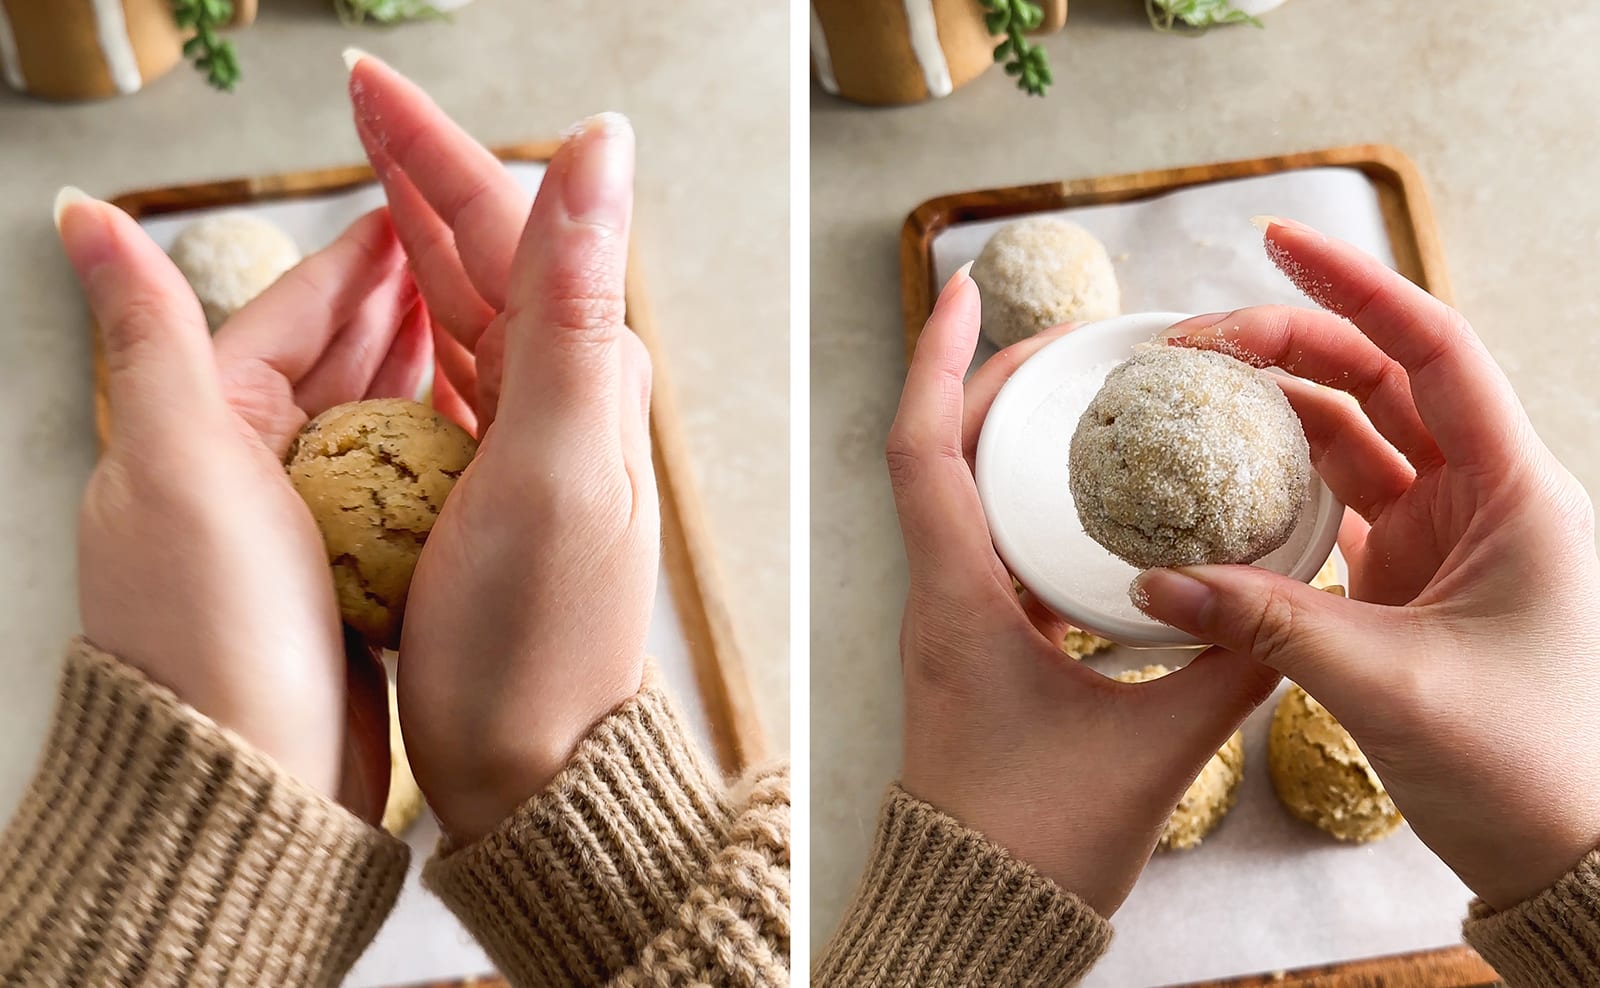 Left to right: rolling a ball of cookie dough in between hands, hand holding a ball of cookie dough coated in sugar.